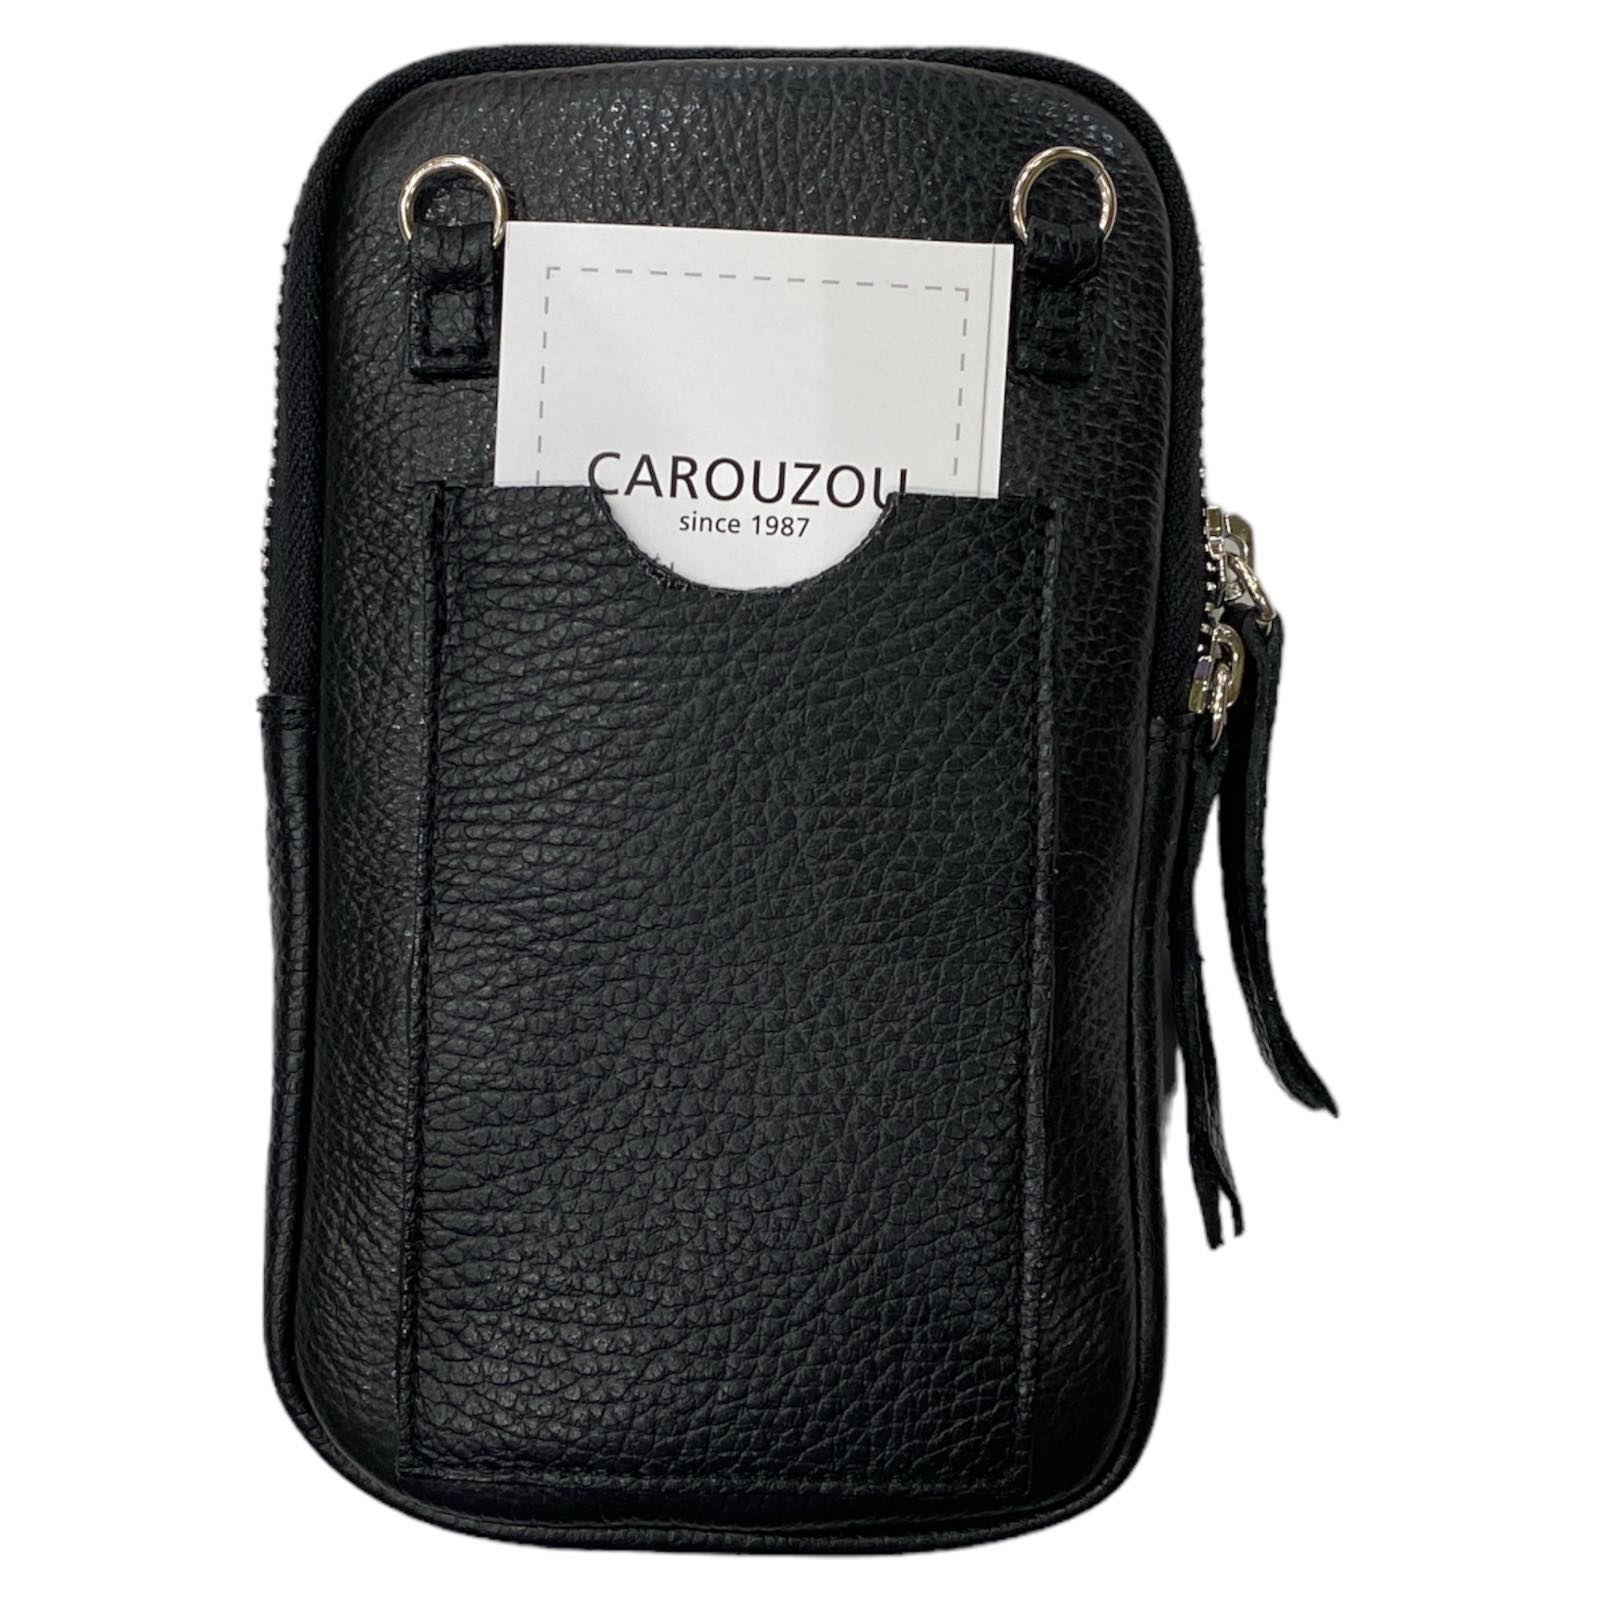 Black and white calf-hair mobile leather case with silver metals